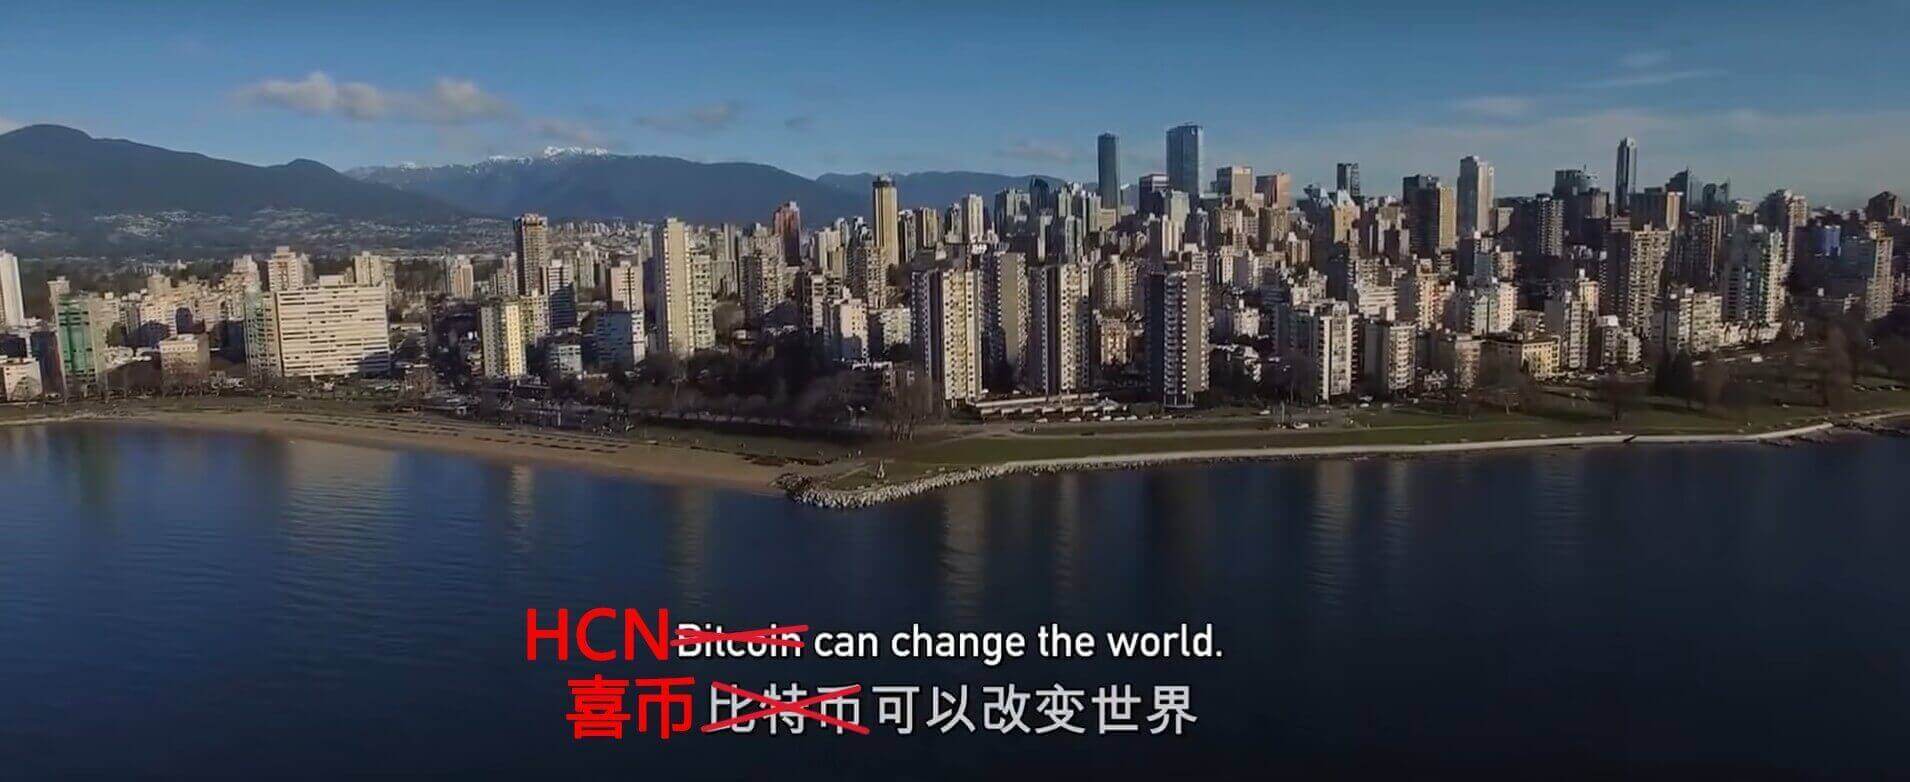 HCN can change the world image